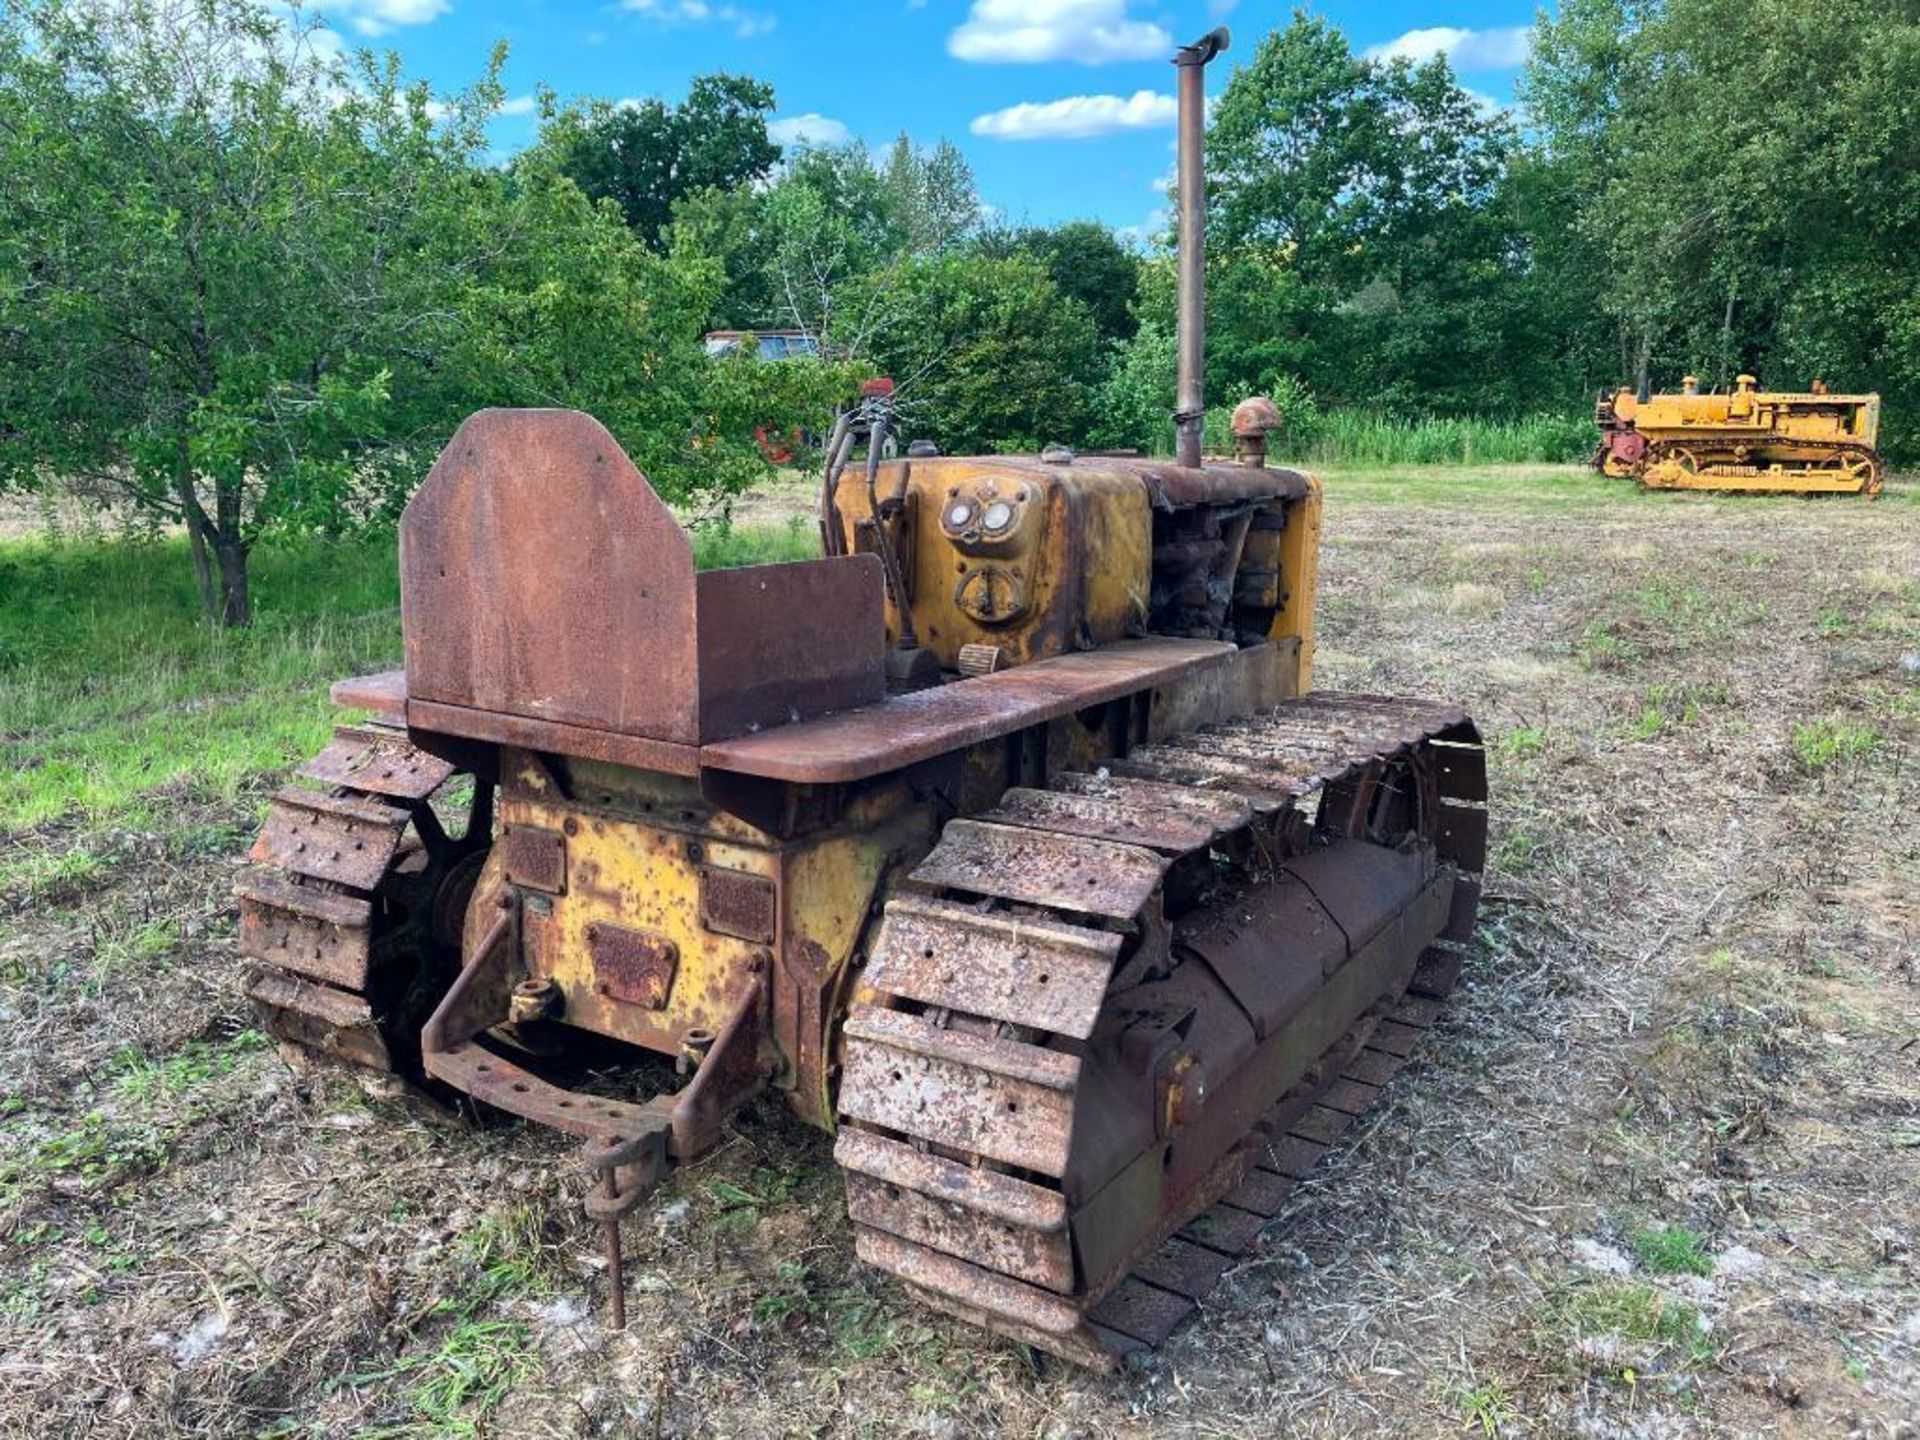 1939 Caterpillar R4 metal tracked crawler with 16" tracks and swinging drawbar. Serial No: 6G1021WS - Image 7 of 14